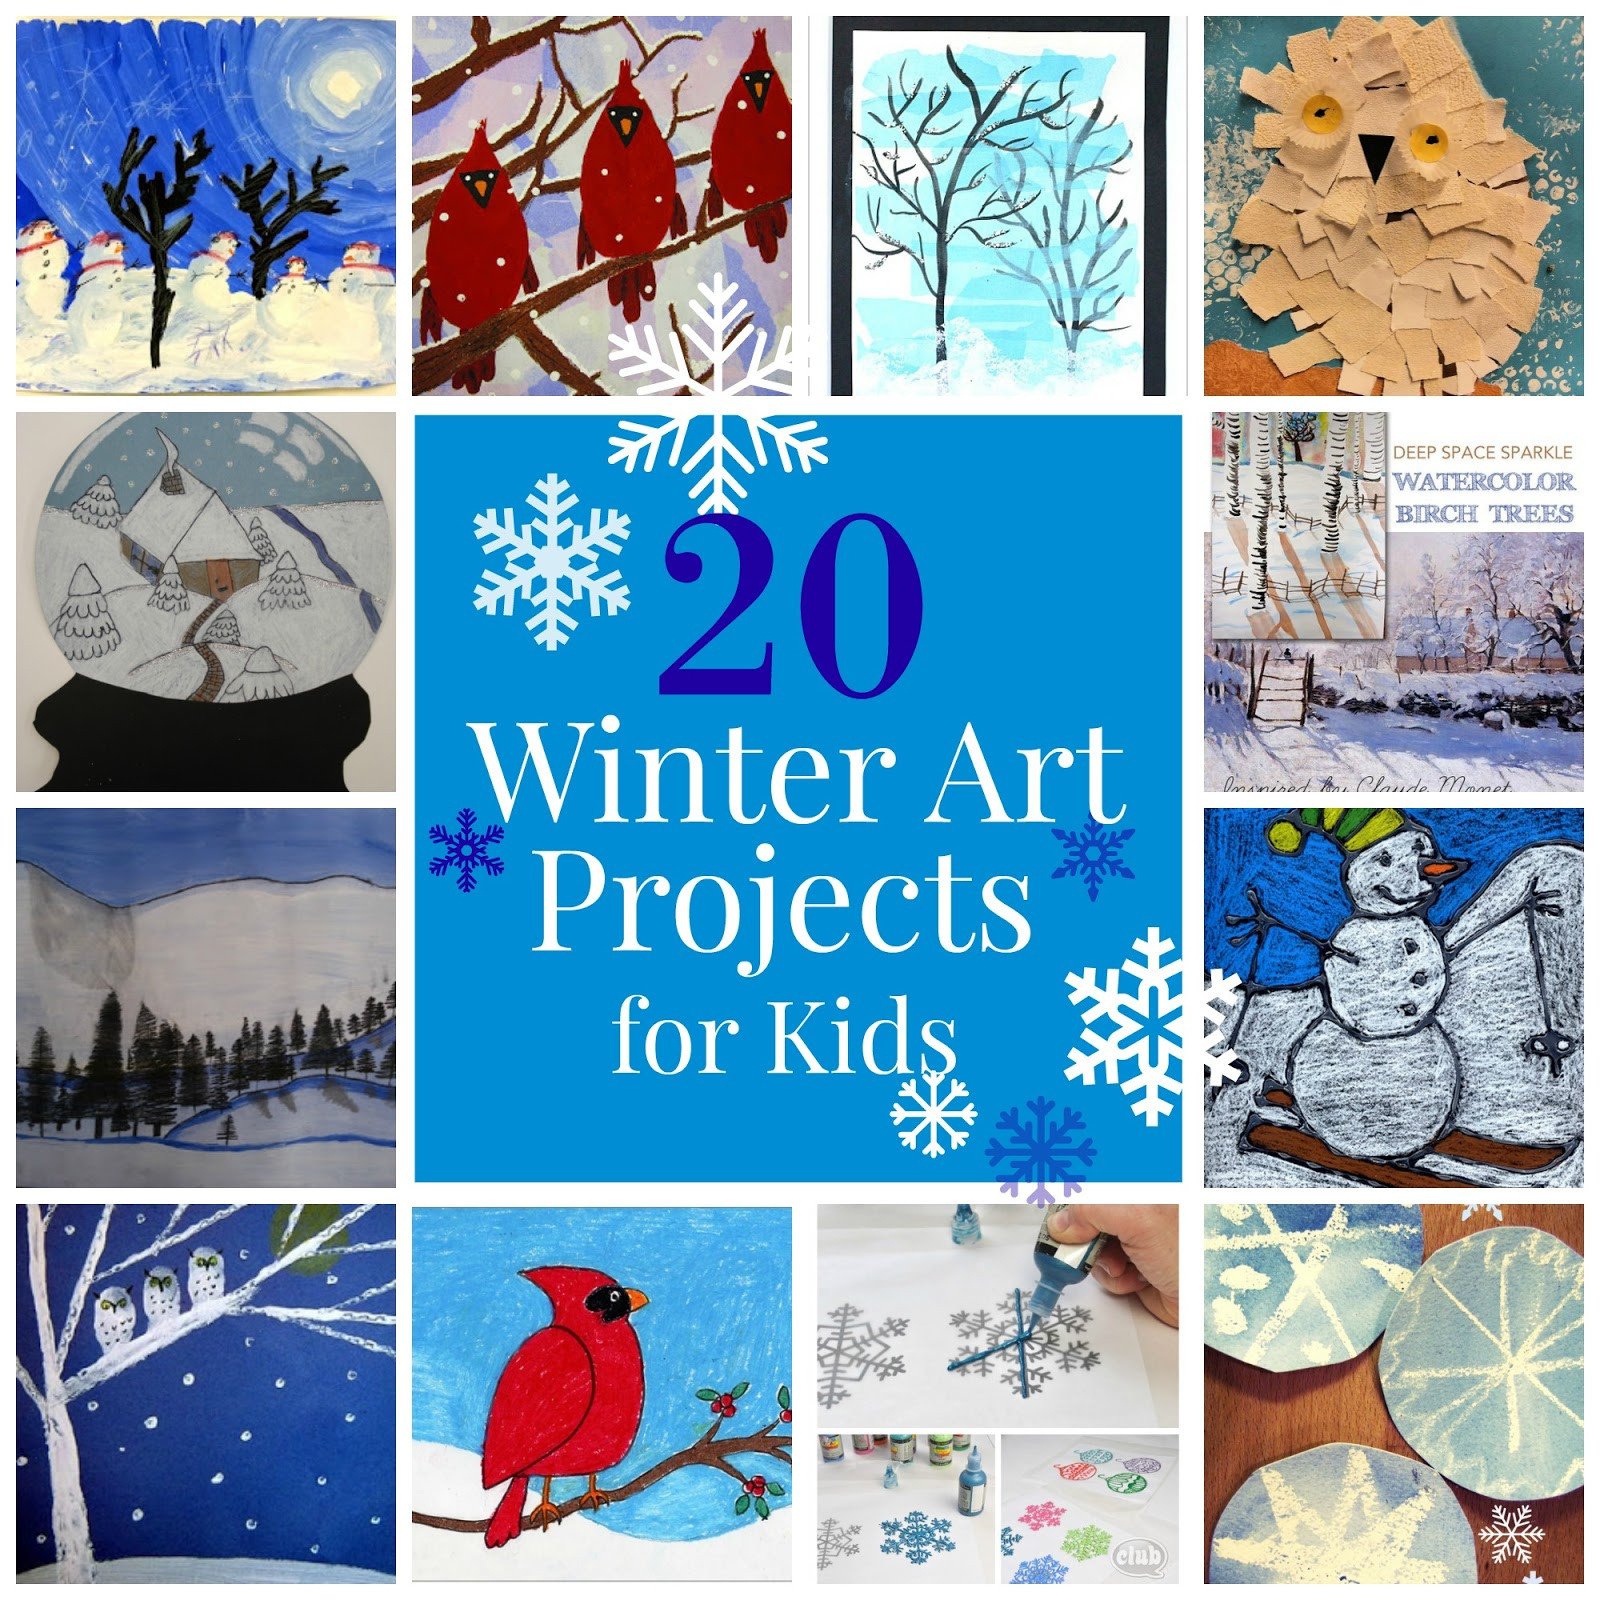 January Craft For Toddlers
 The Unlikely Homeschool 20 Winter Art Projects for Kids